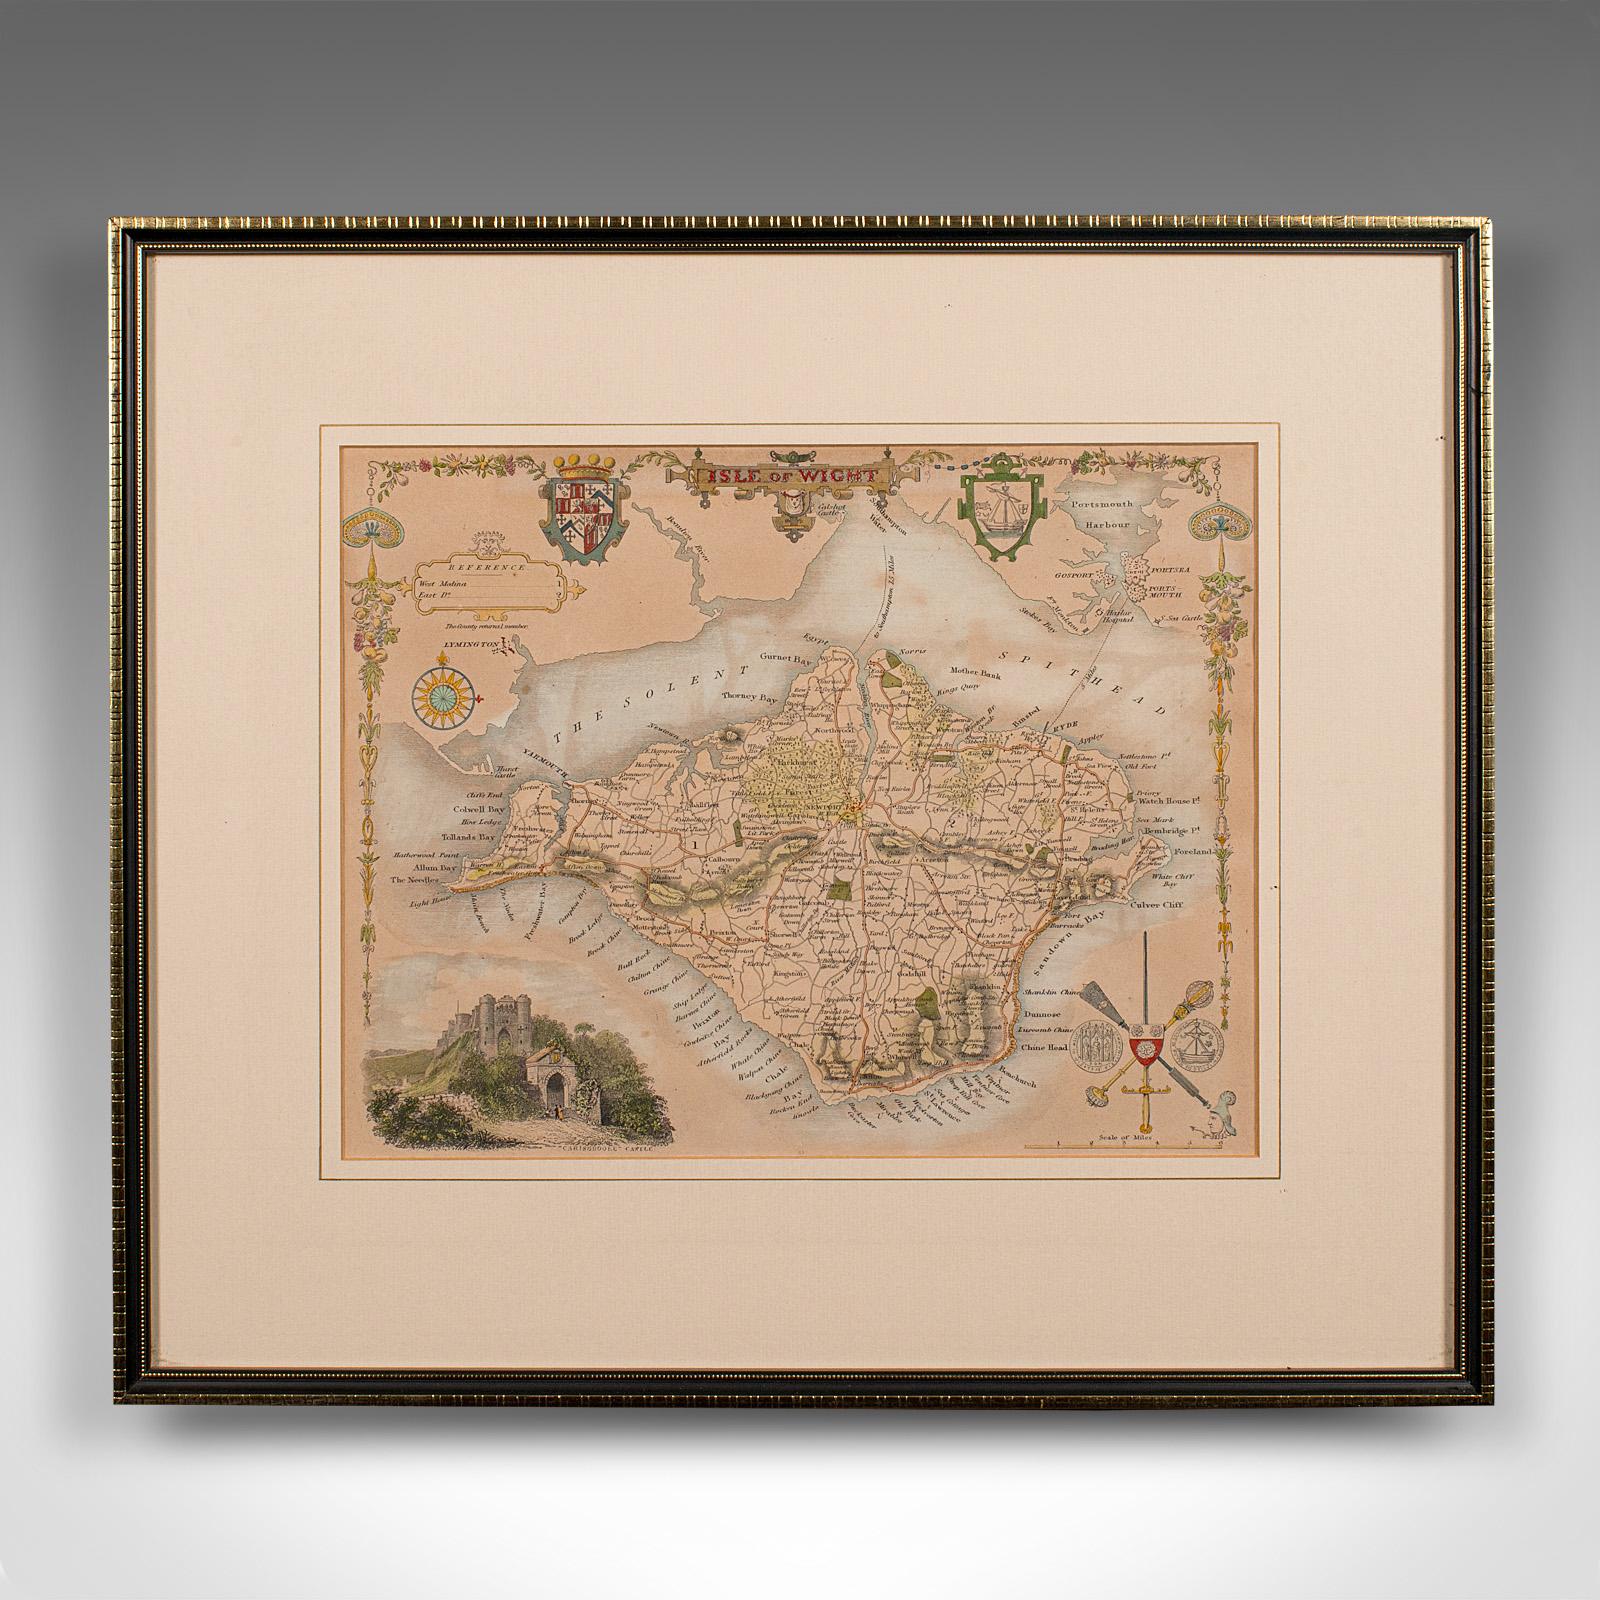 This is an antique lithography map of the Isle of Wight. An English, framed atlas engraving of cartographic interest, dating to the early 19th century and later.

Superb lithography of the Isle and its county detail, perfect for display
Displaying a